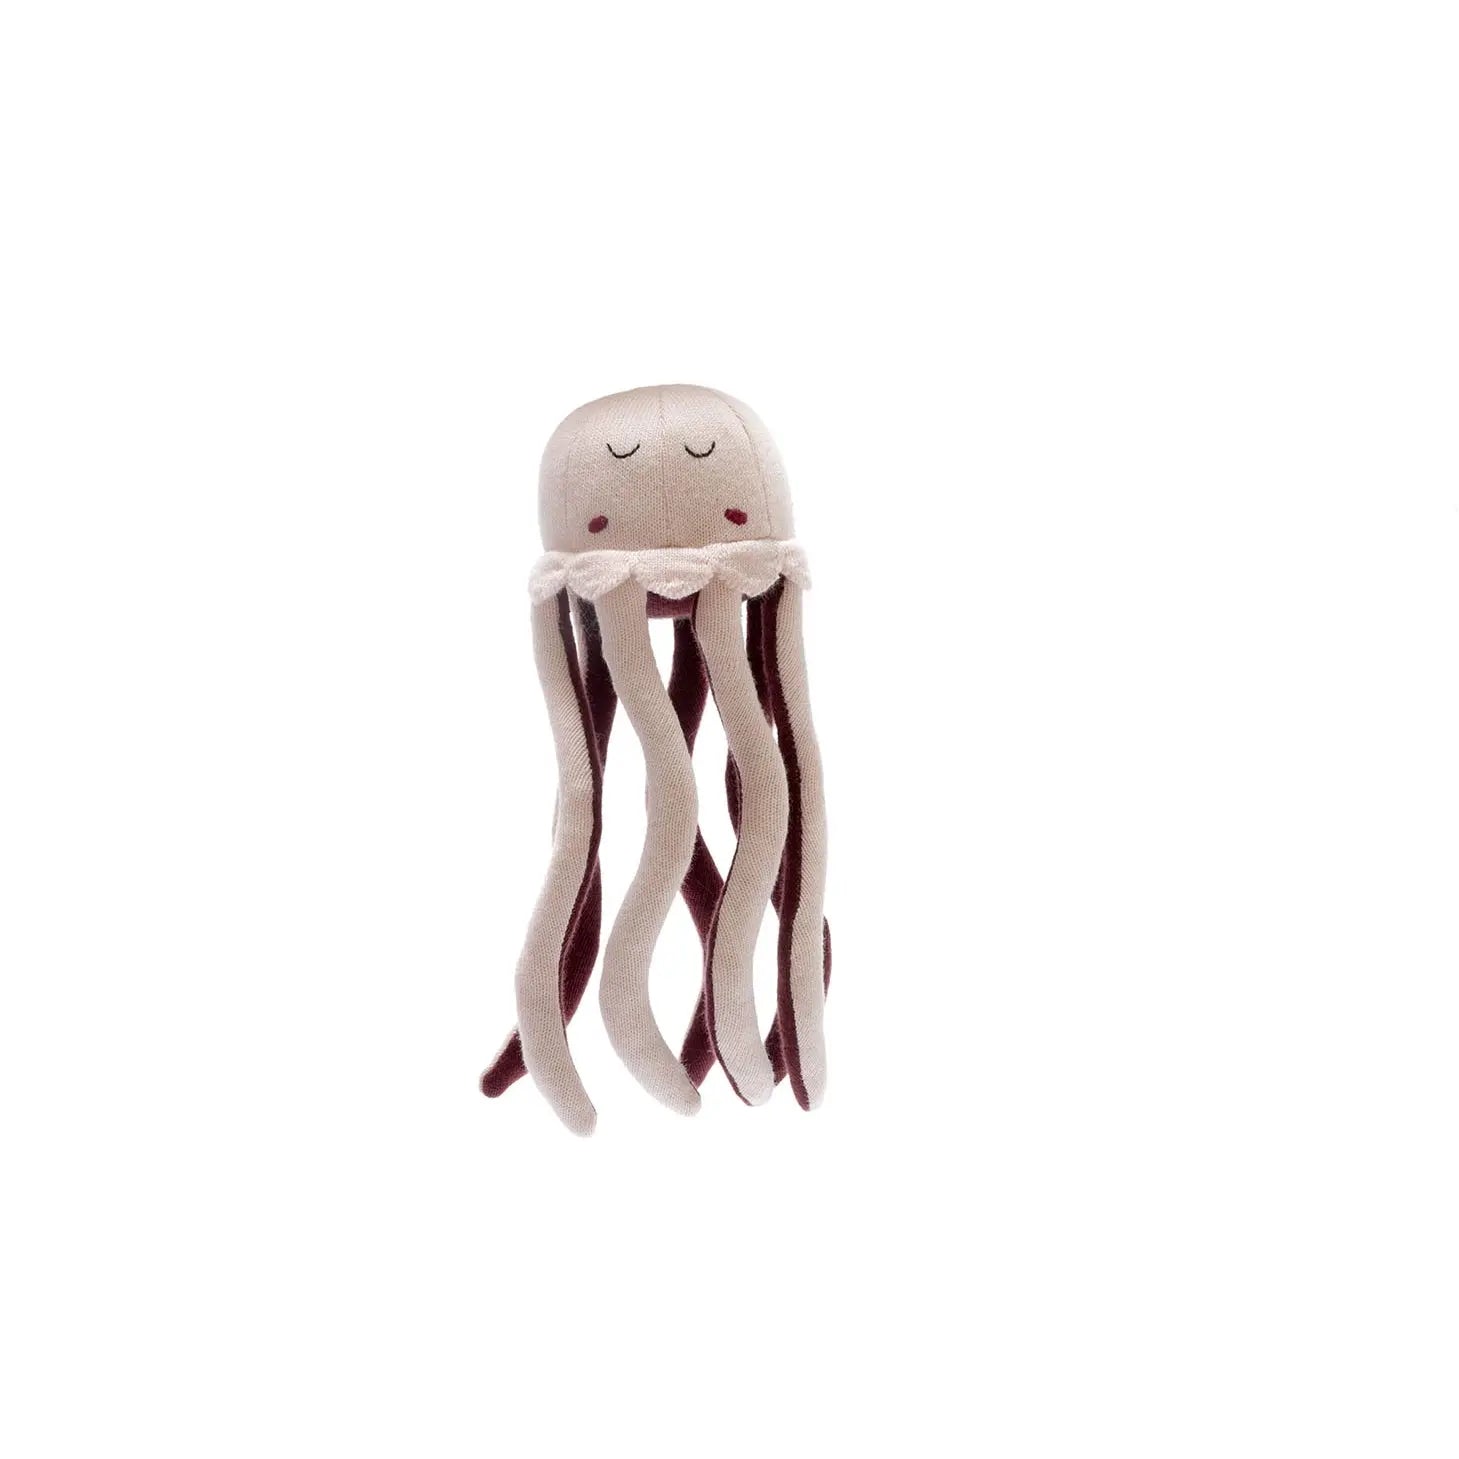 The Tiny Details Knitted Organic Cotton Jellyfish Plush Toy